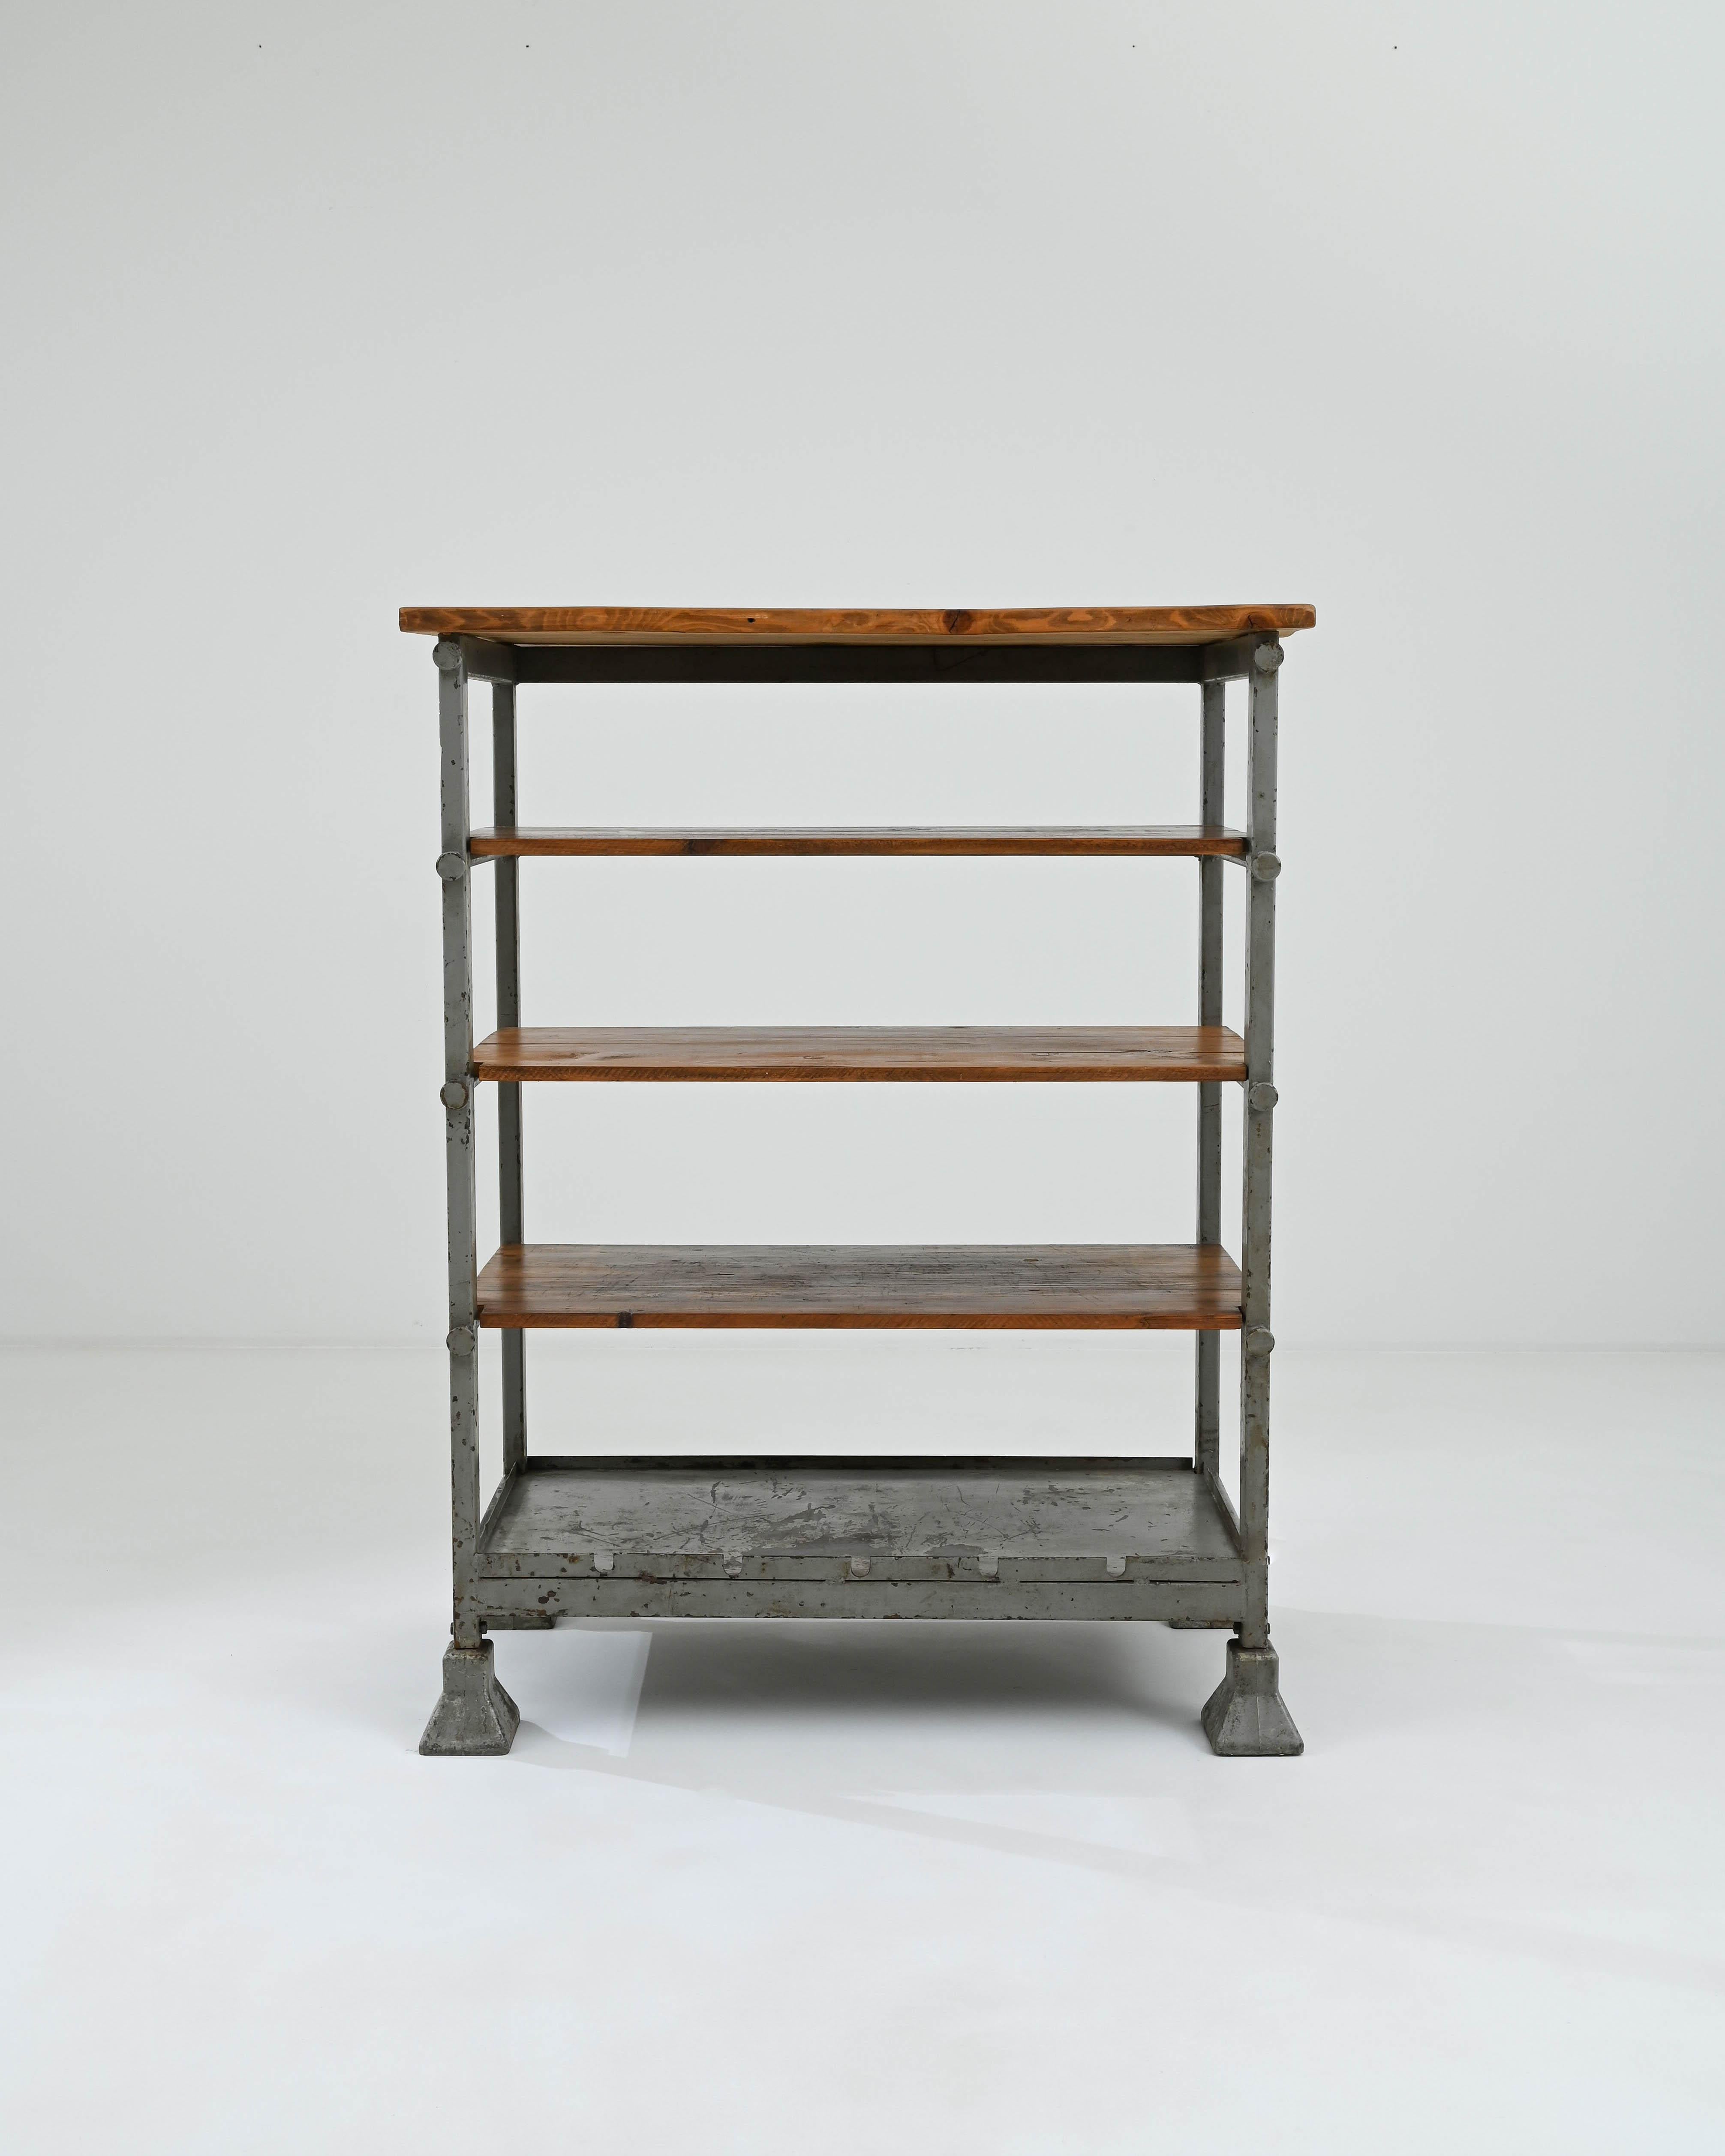 A wooden and metal shelf created in 20th century central Europe. Industrial, yet surprisingly homey, this sturdy set of shelves emits a both utilitarian and approachable aura. Forthright in its design, the four equally sized shelves offer a wealth